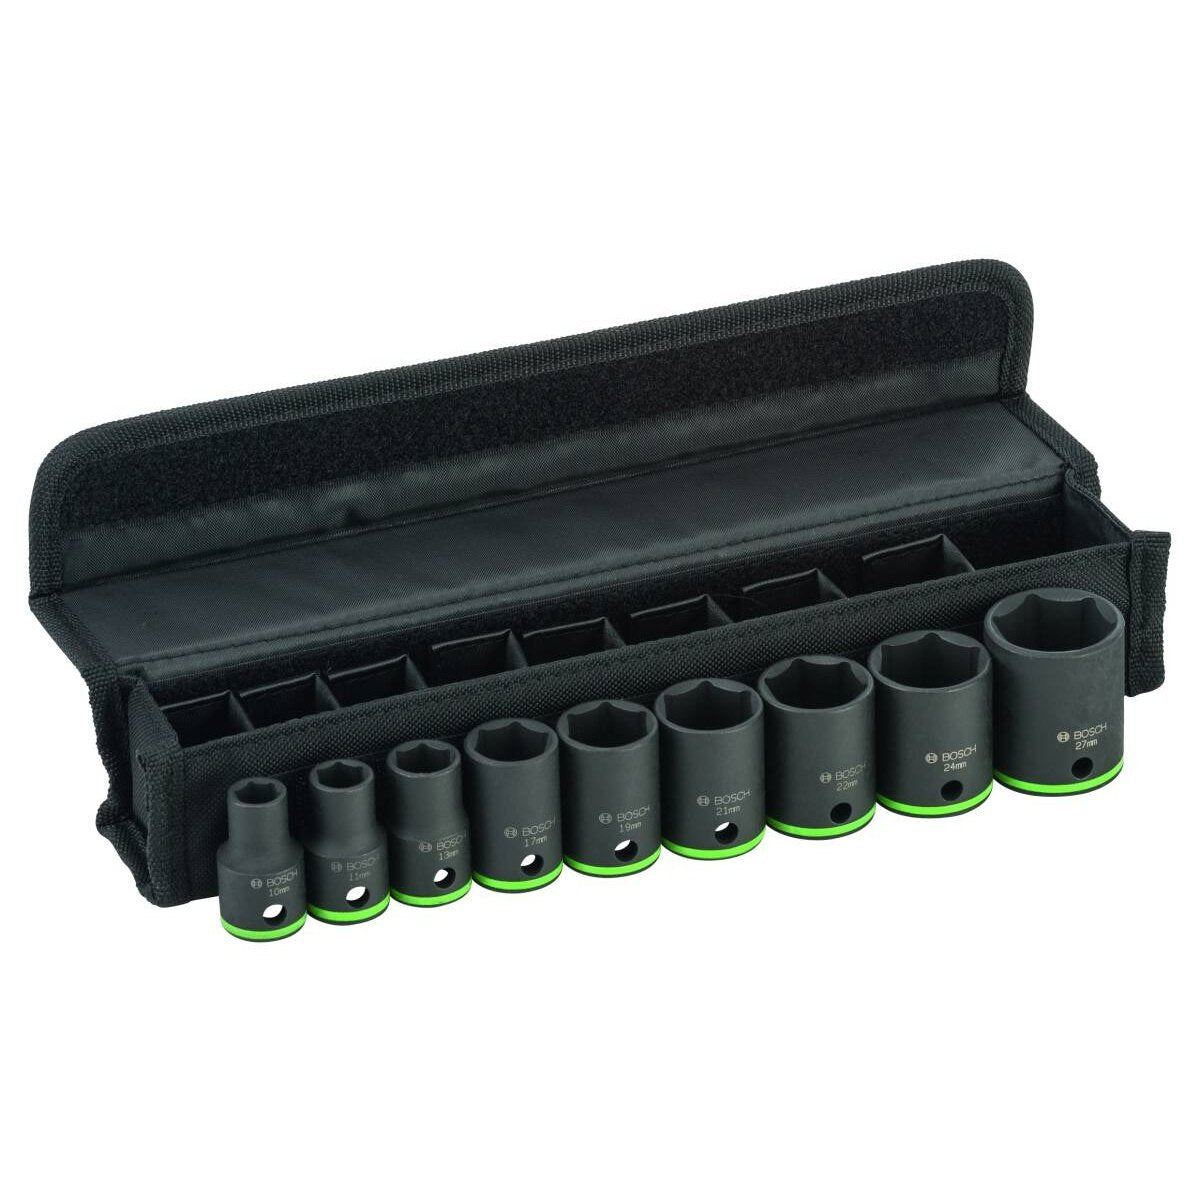 Empower your toolkit with the Bosch 9-Piece Deep Impact Socket Set (2608551101) at SupplyMaster.store in Ghana.  Sockets & Hex Keys Buy Tools hardware Building materials